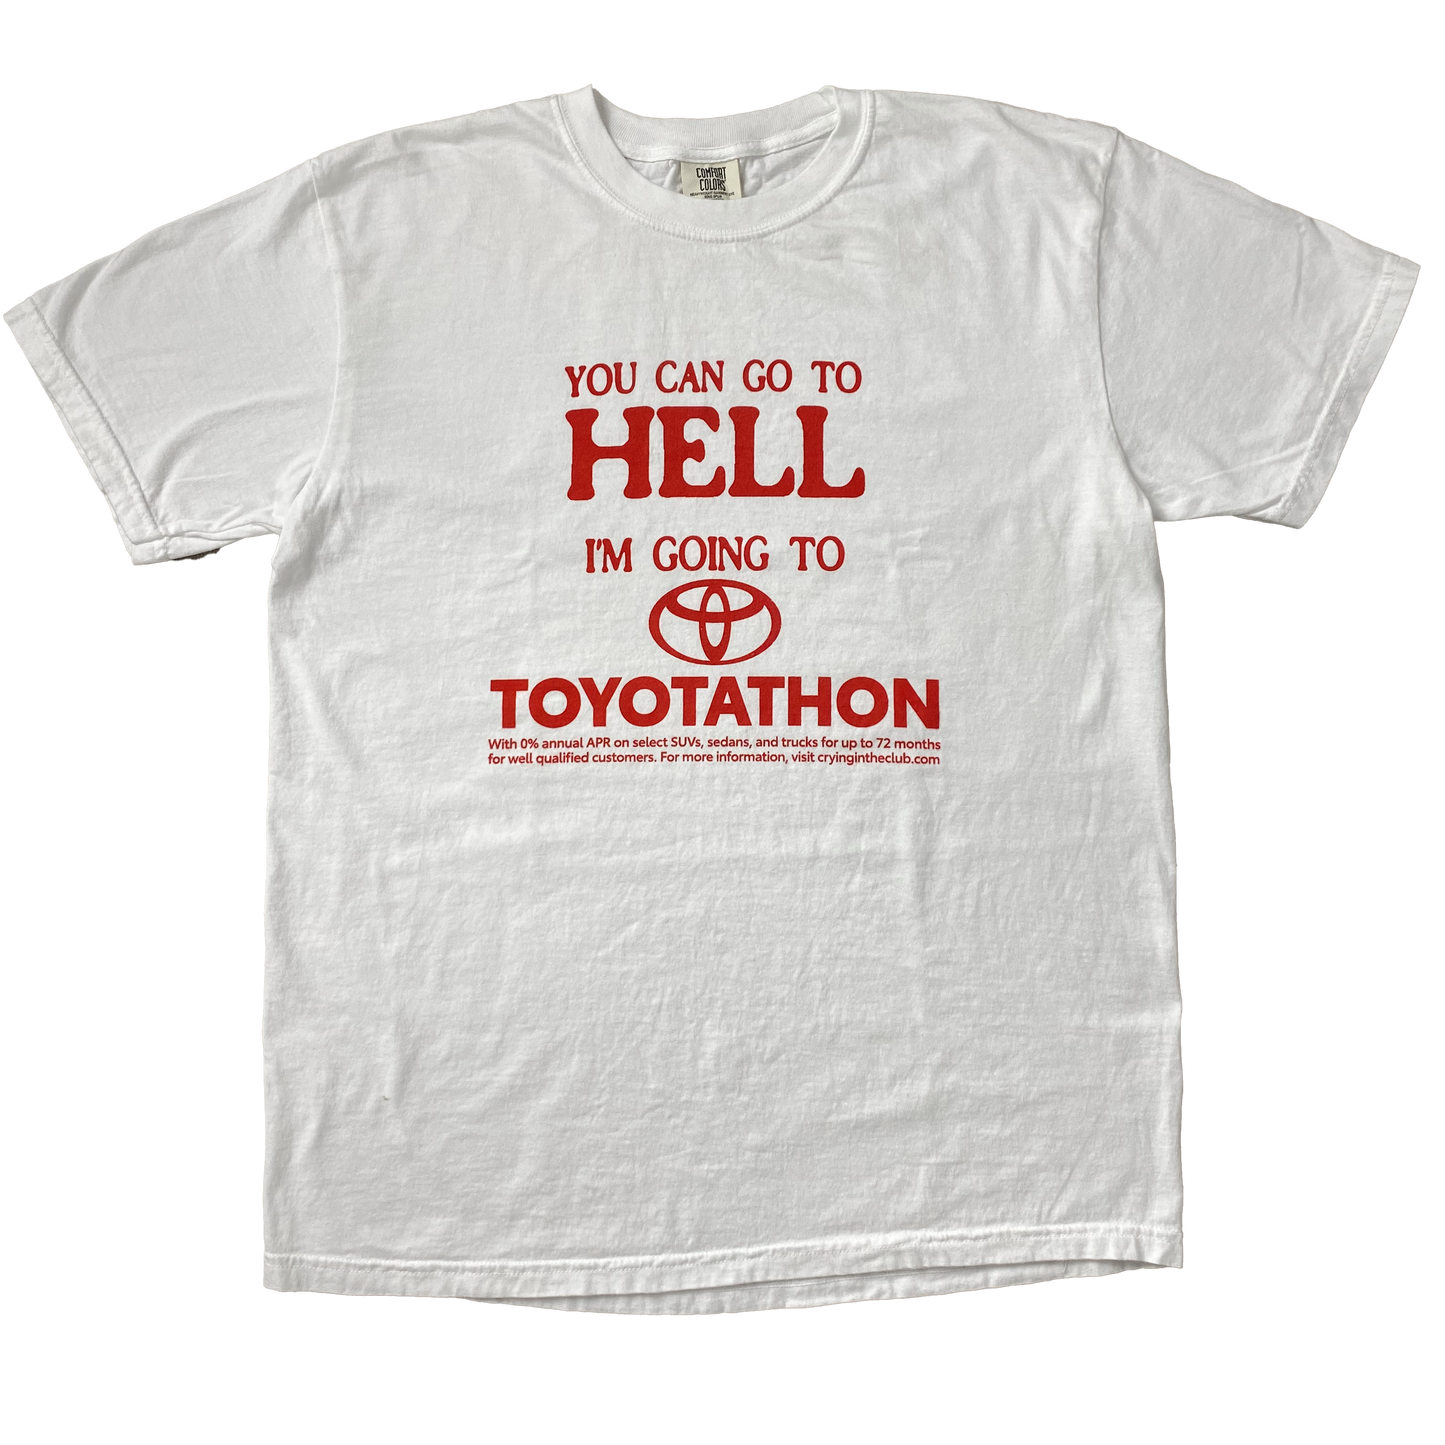 YOU CAN GO TO HELL IM GOING TO TOYOTATHON SHIRT